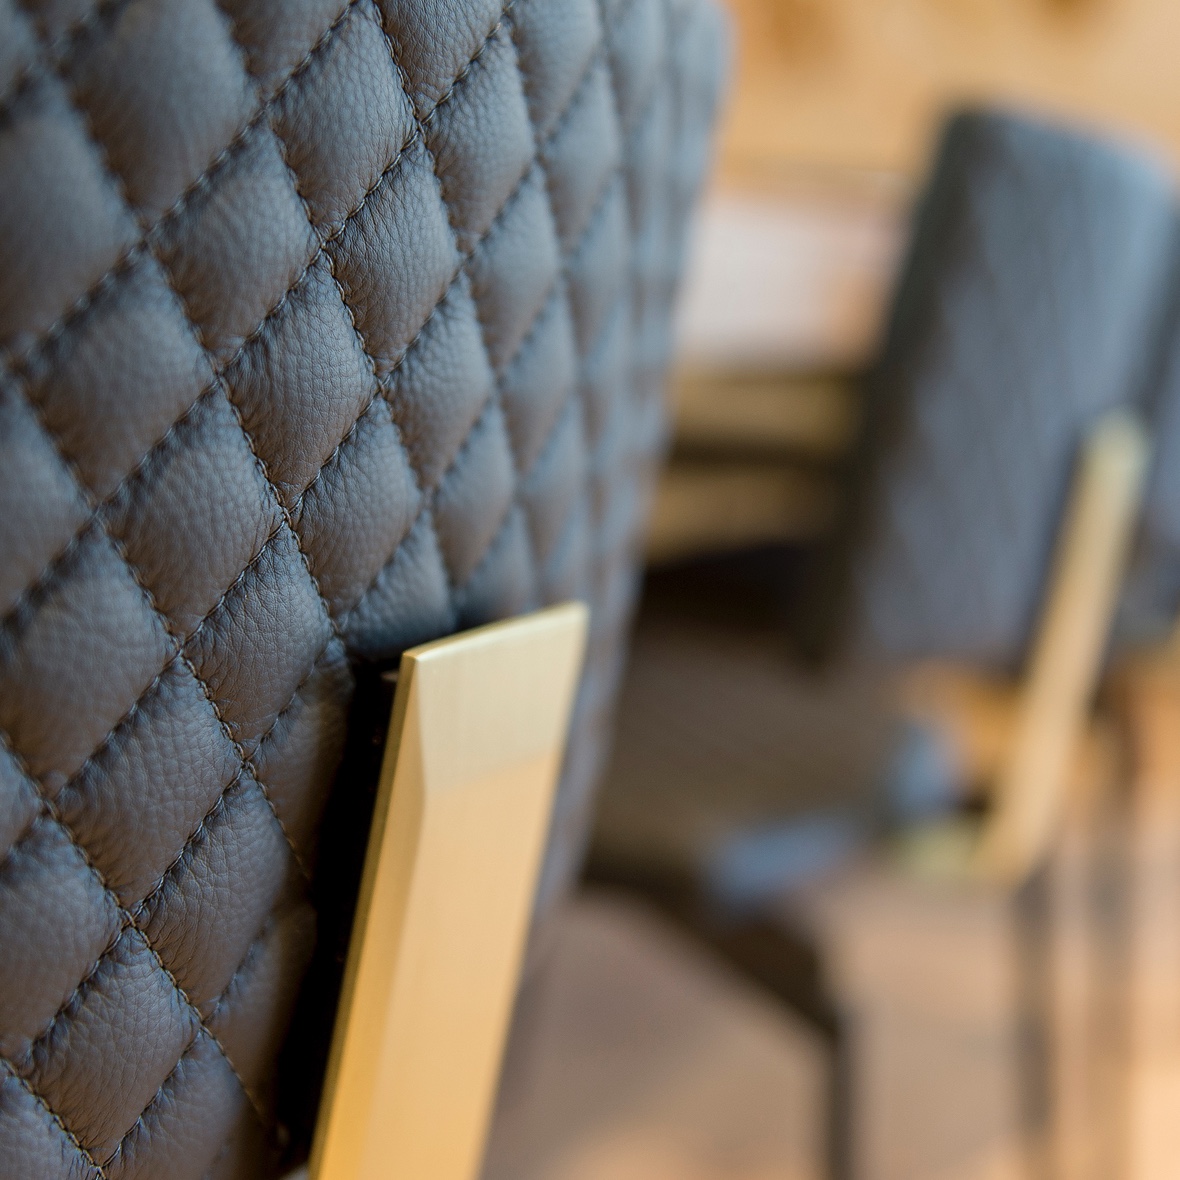 Beautiful ripples of diamond quilted premium leather cover the dining chairs created by Australian designer FrancoCrea